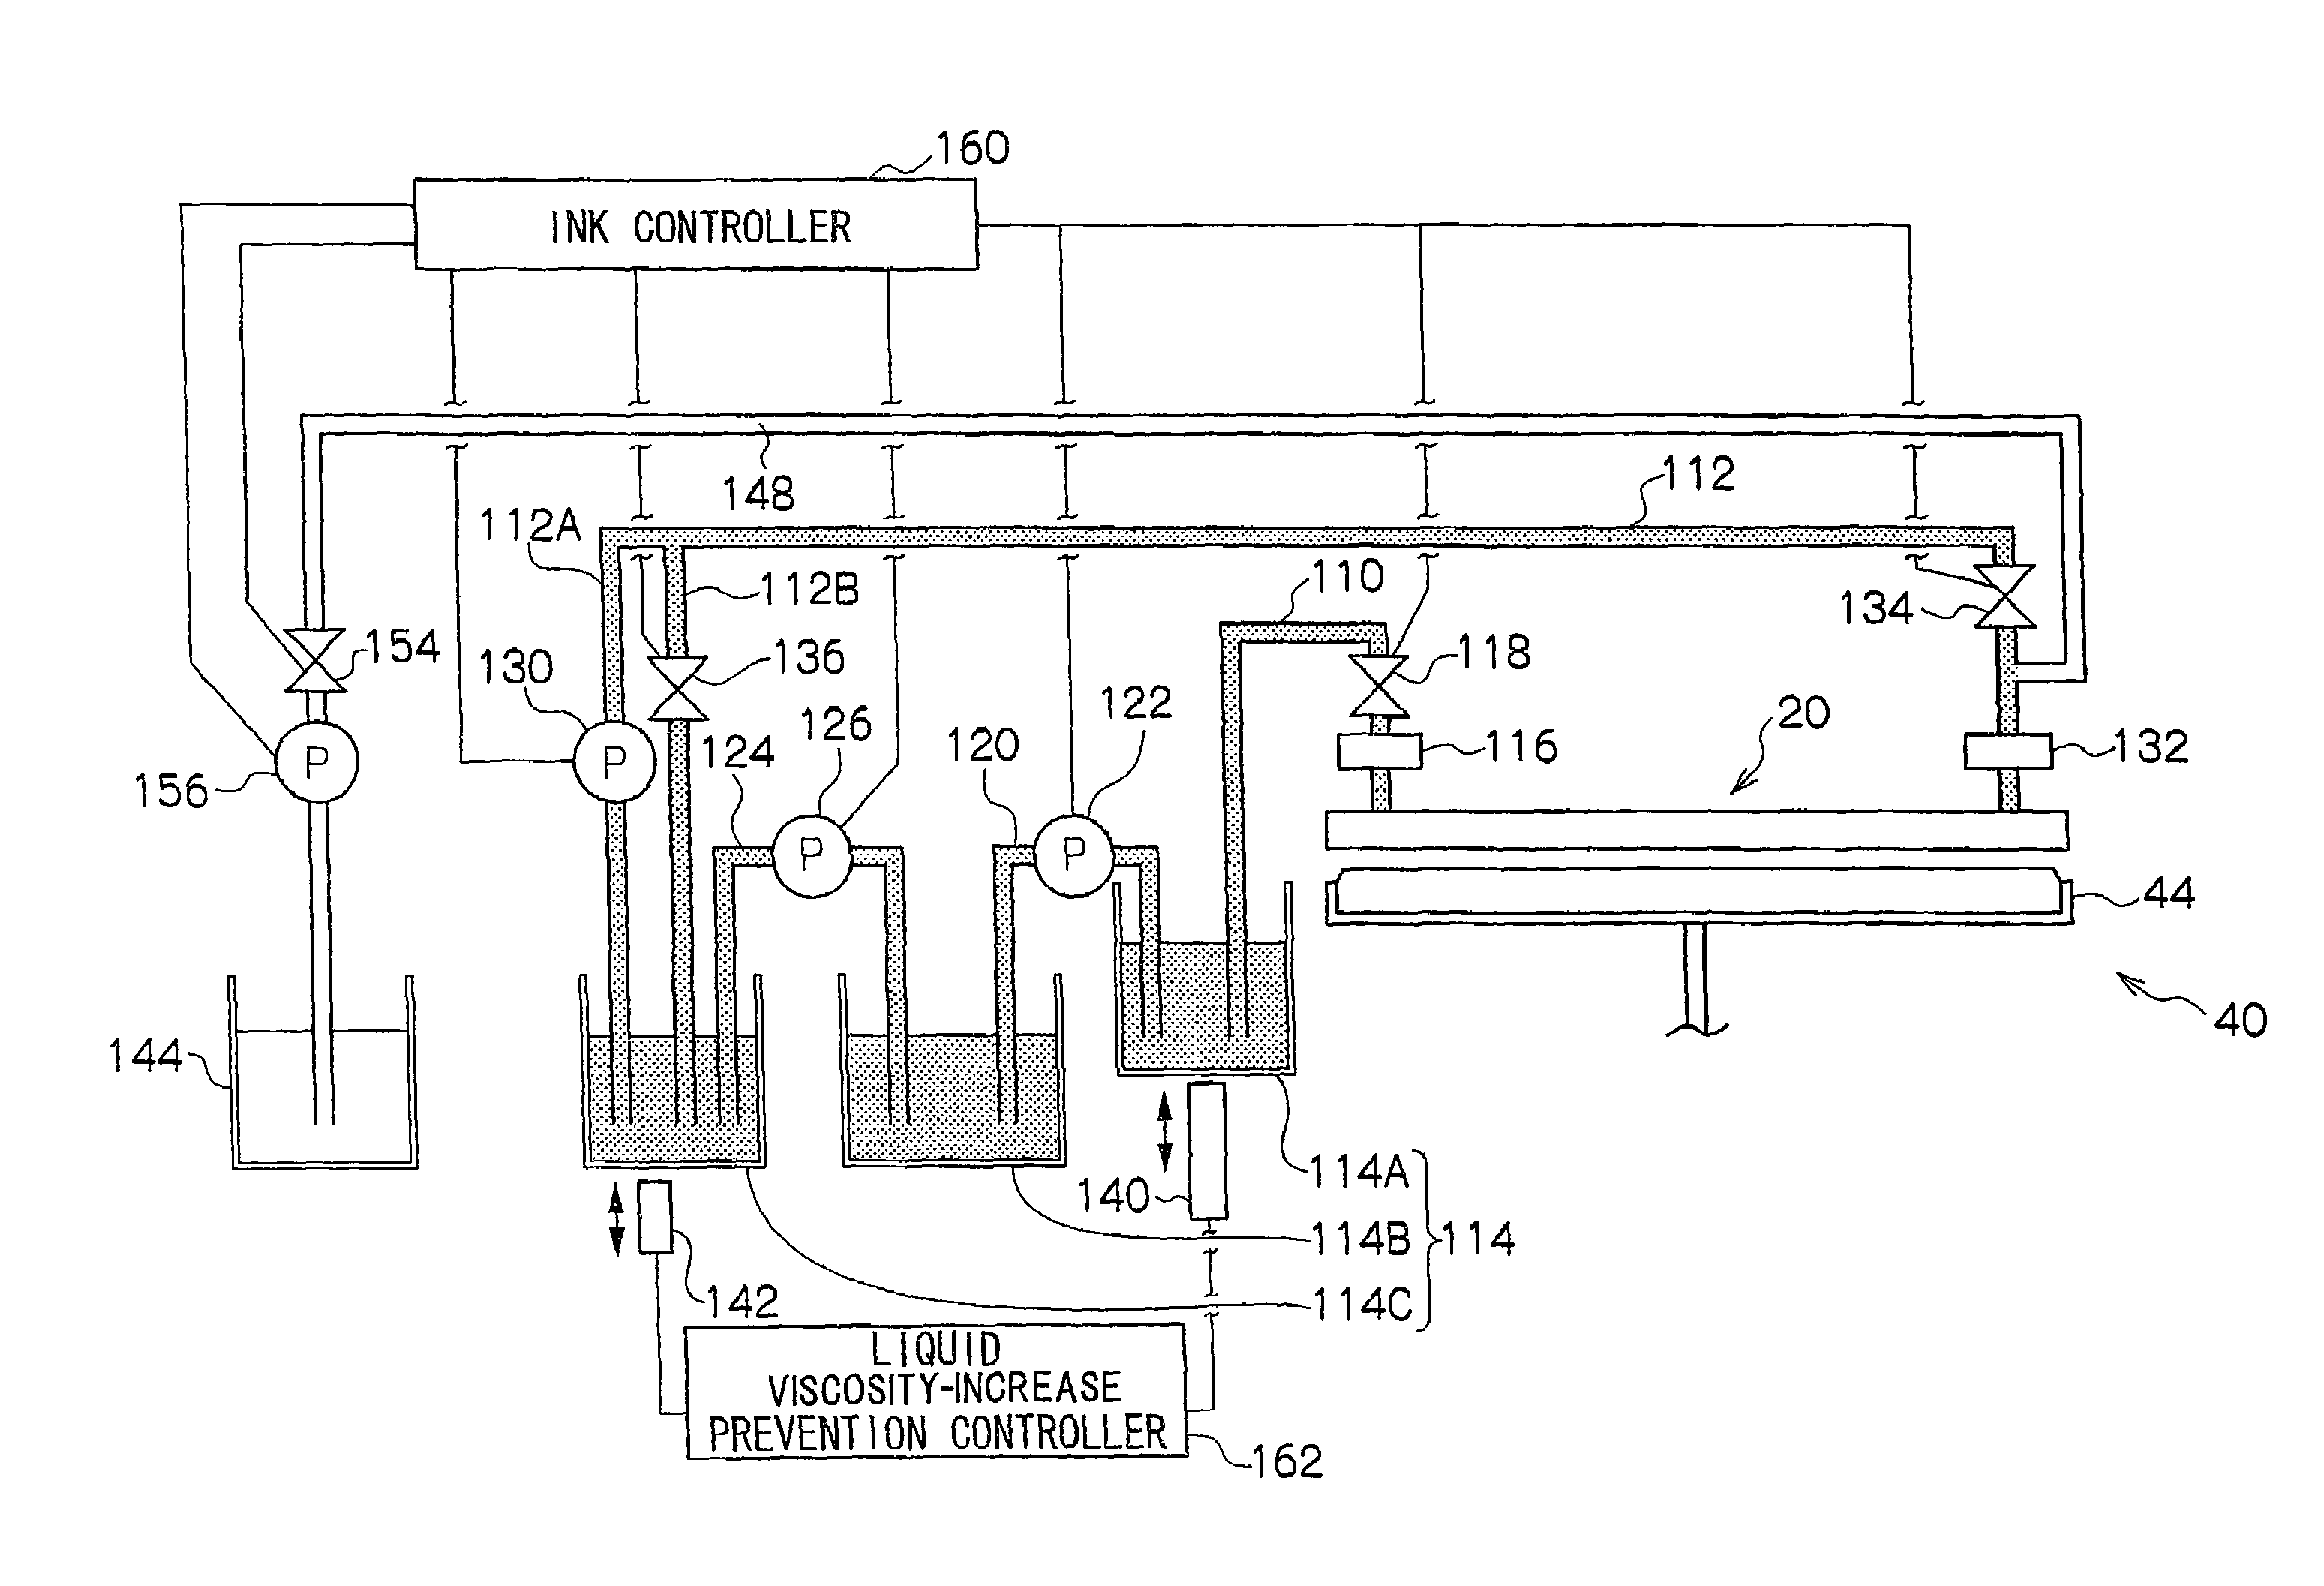 Liquid droplet ejection head and image forming apparatus having the same